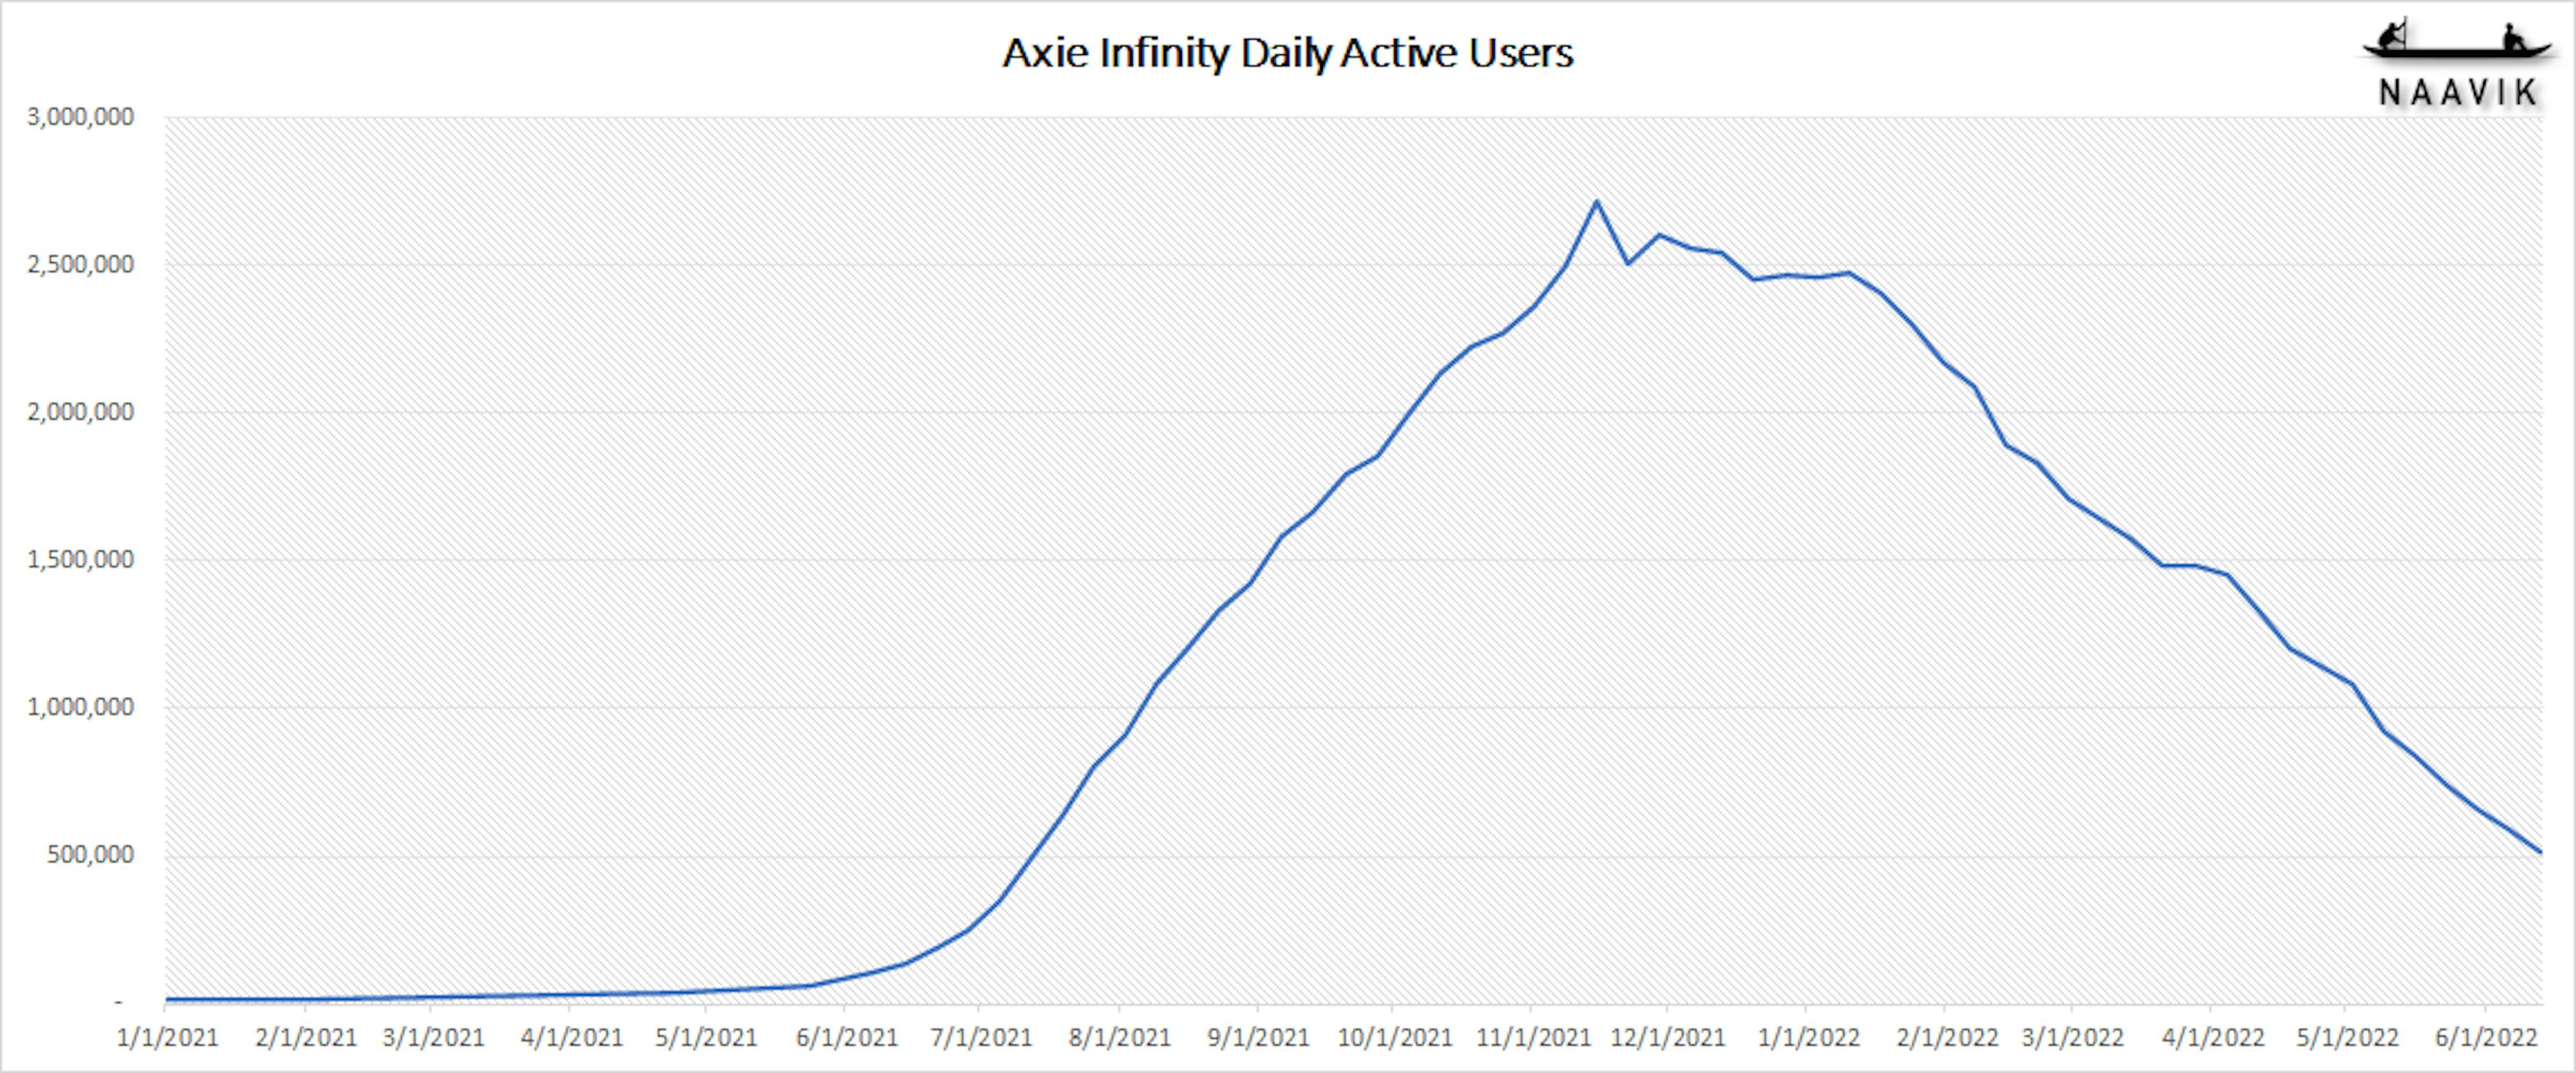 Axie Infinity daily active users